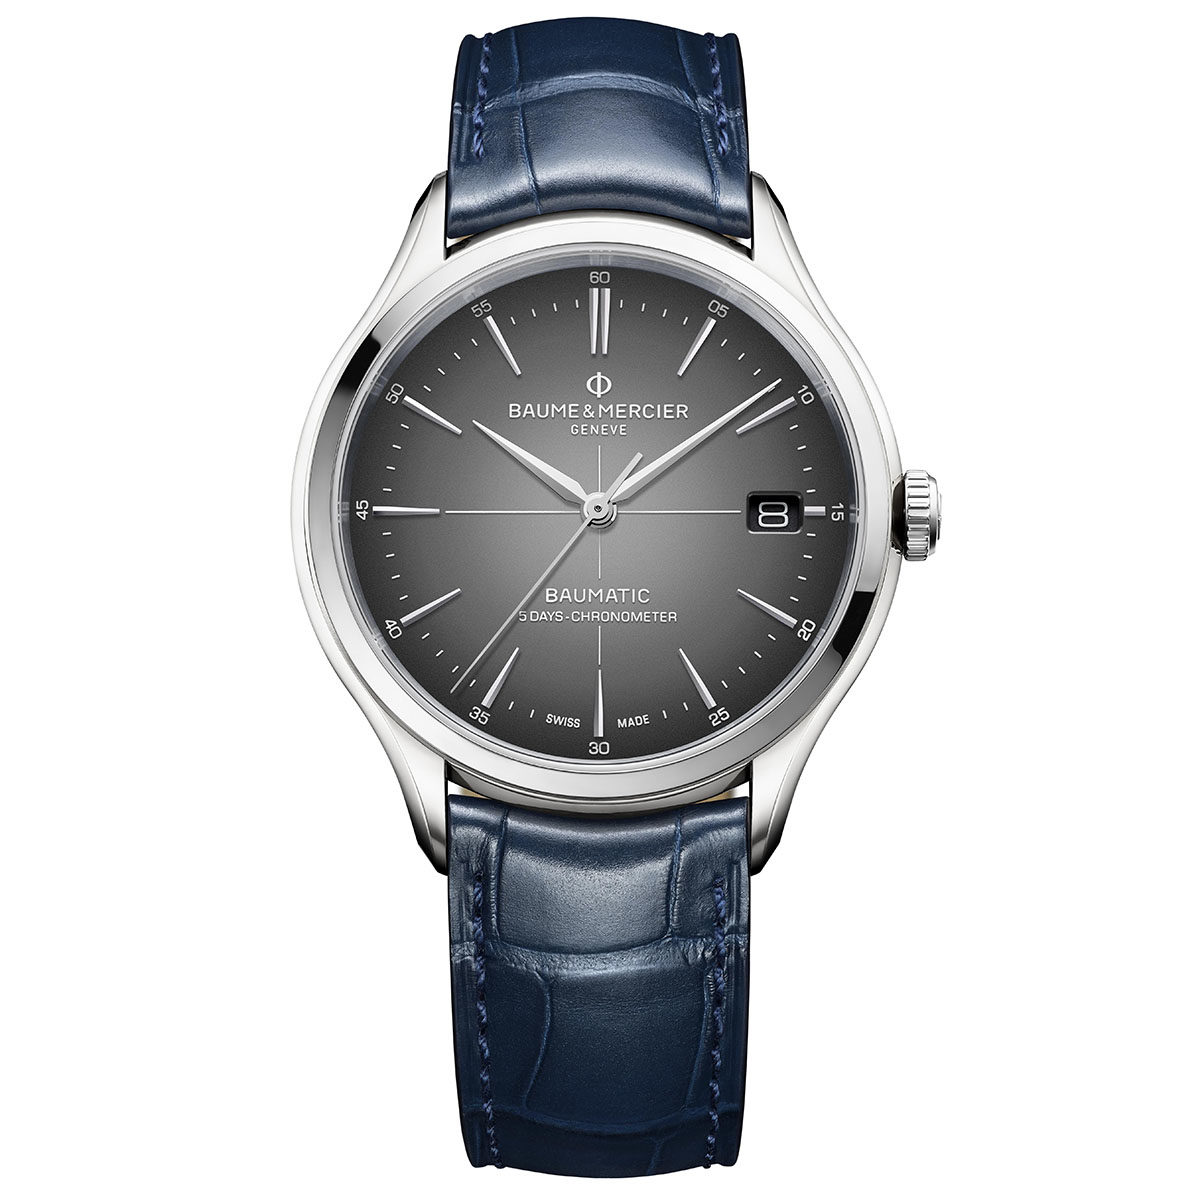 To The Moon: Baume & Mercier Makes An Enticing Value Proposition In ...